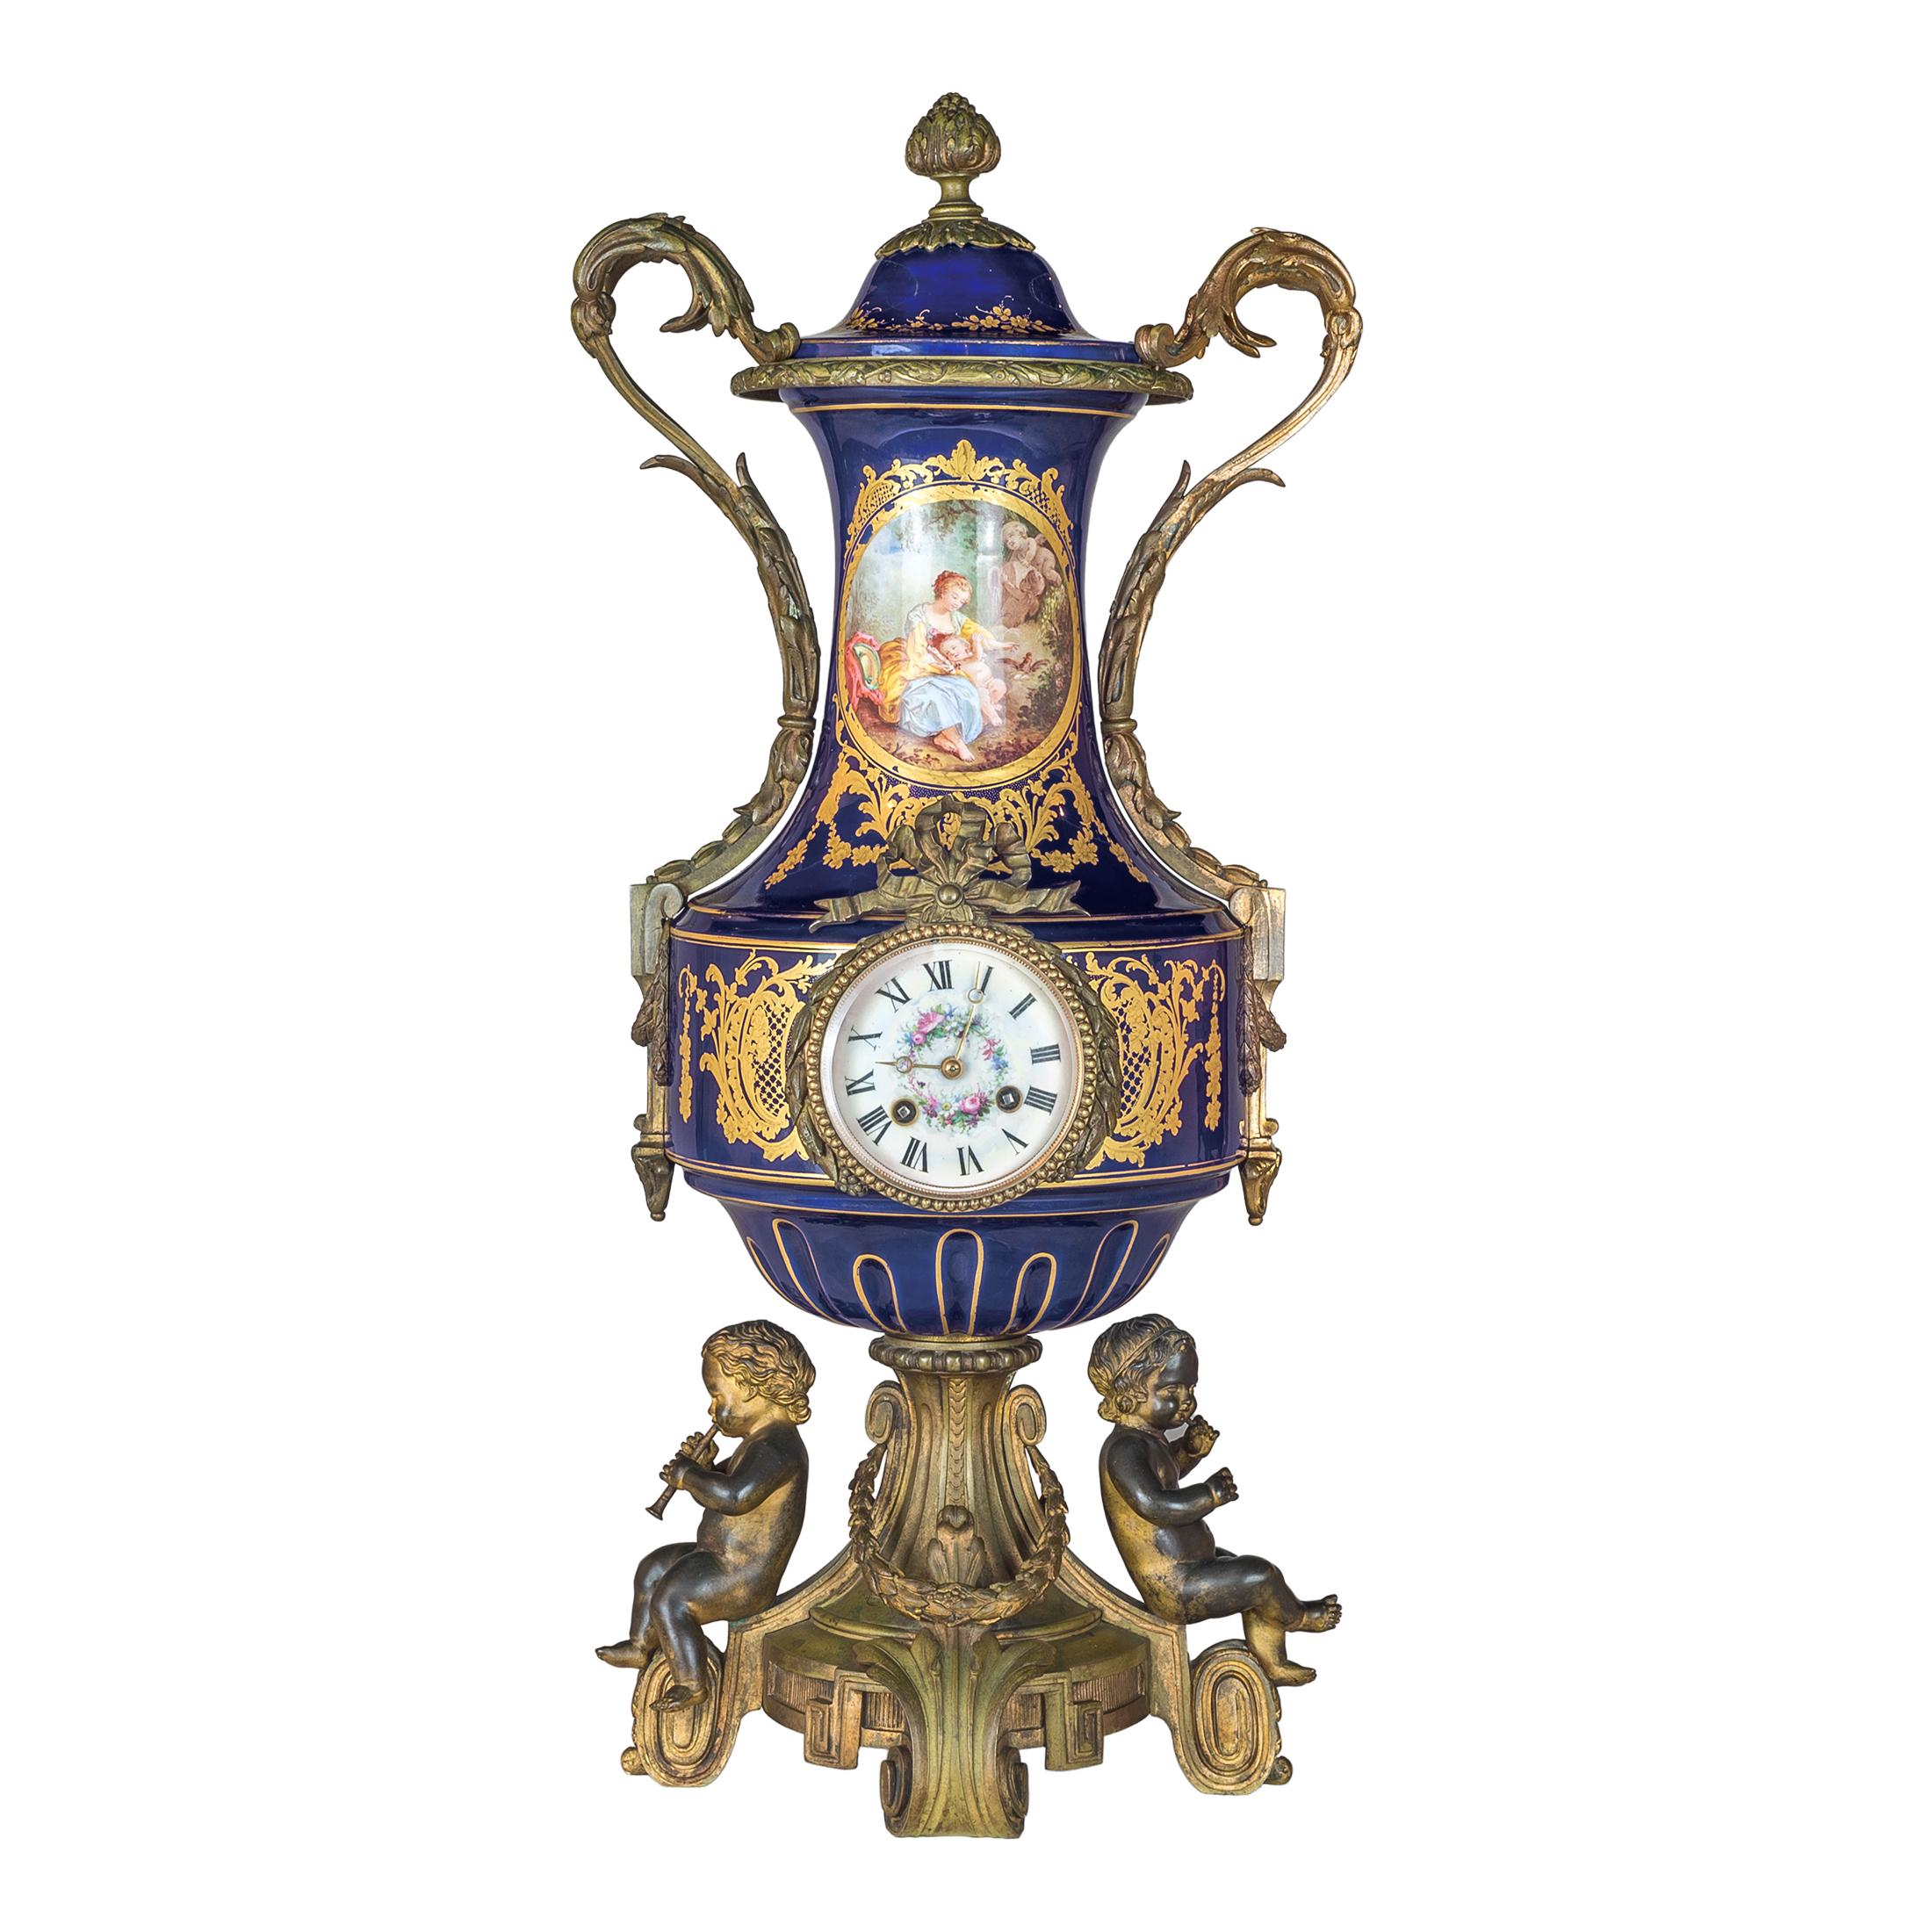 A fine quality 19th century Sèvres ormolu-mounted porcelain clockset.

Origin: French
Date: 19th century
Dimension: Clock: 25 in high; Urns: 24 in high.